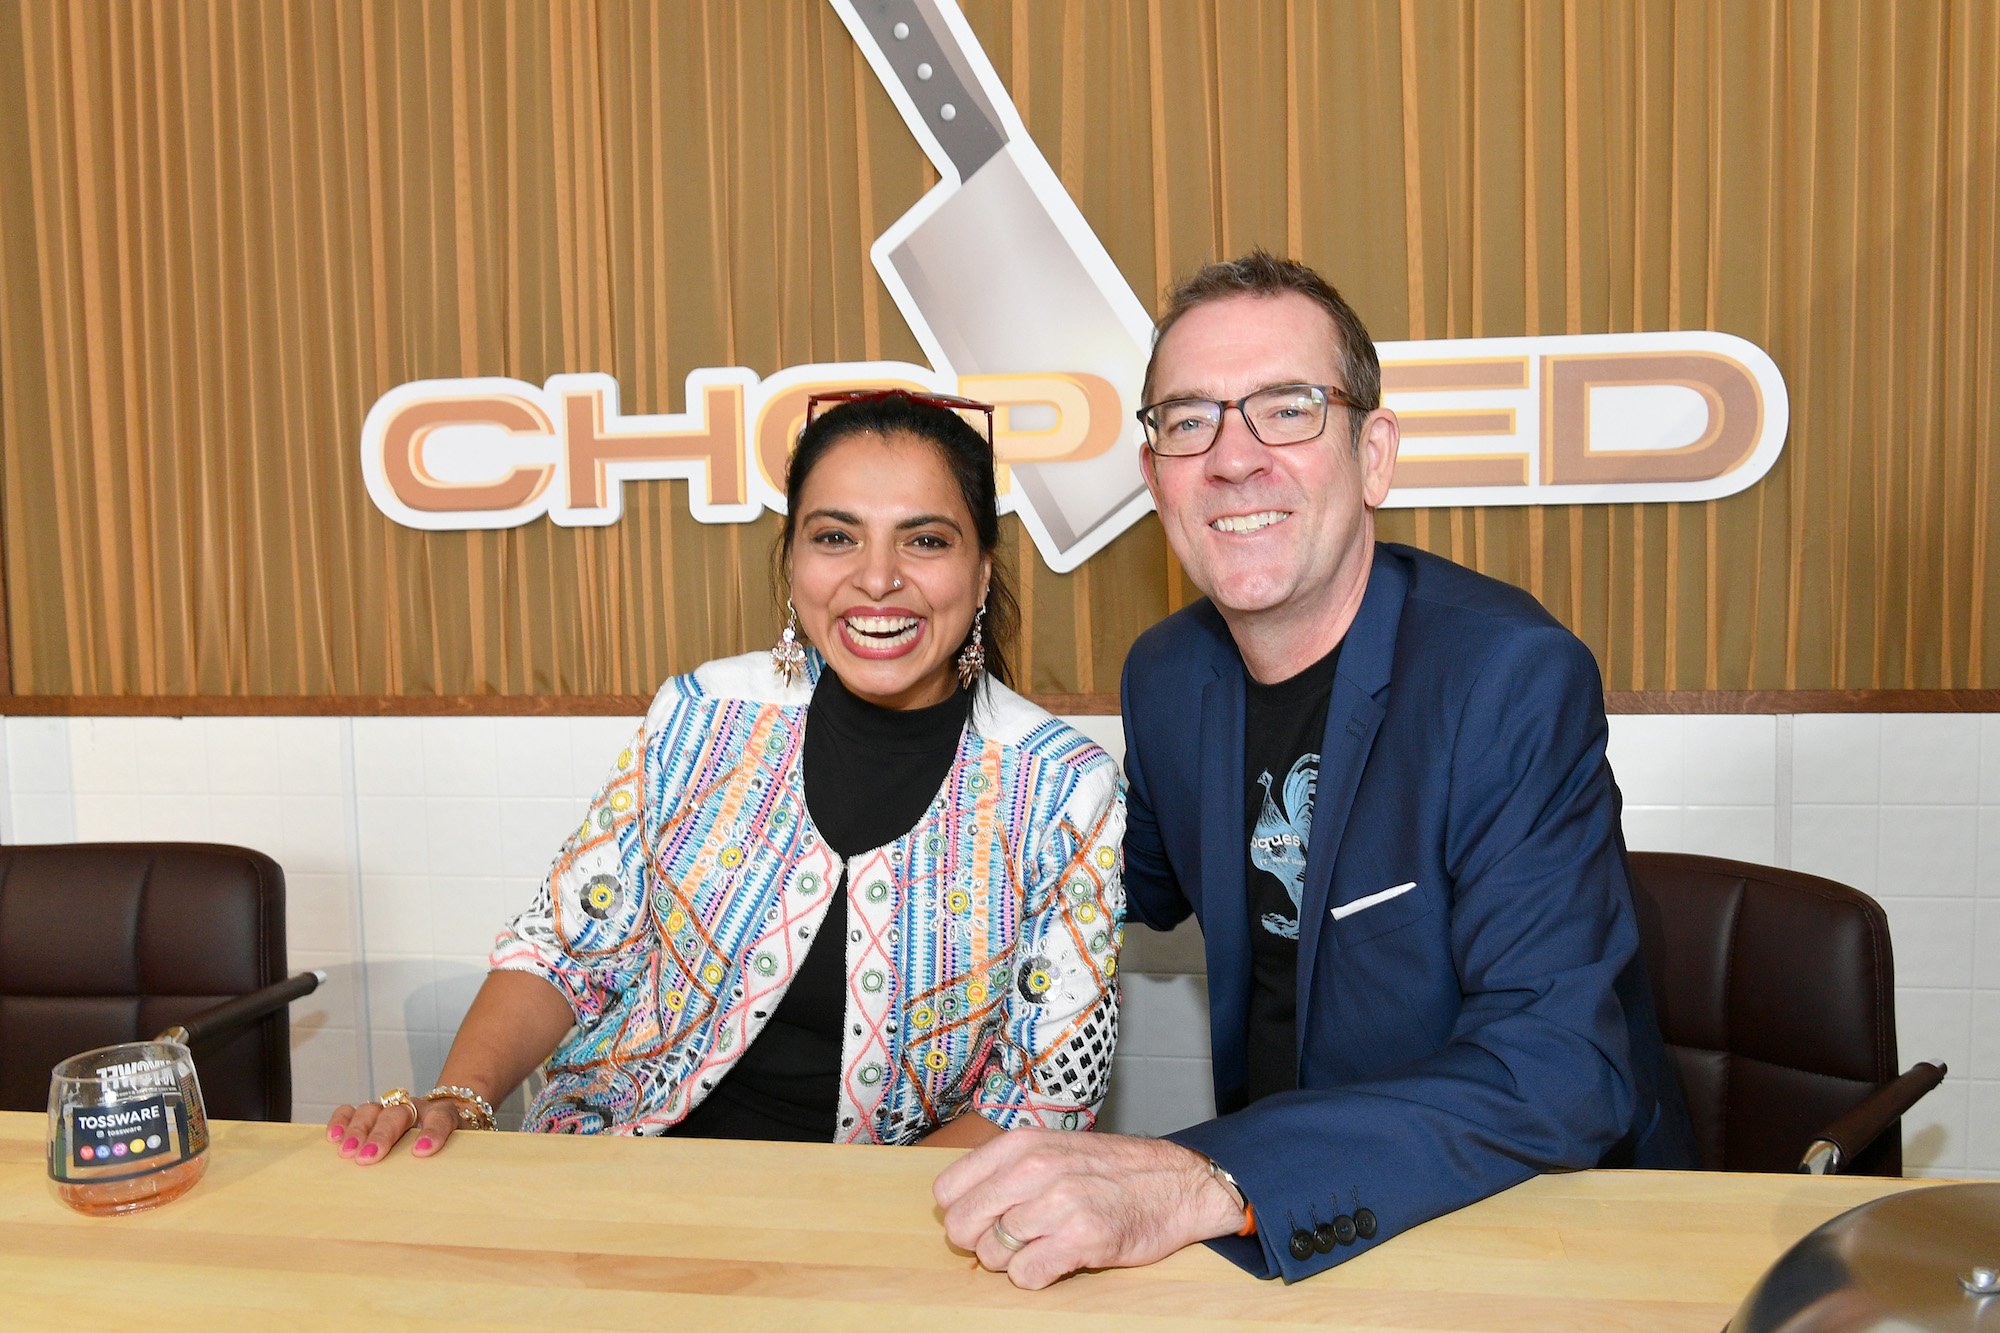 Maneet Chauhan and Ted Allen smiling in front of the Chopped logo